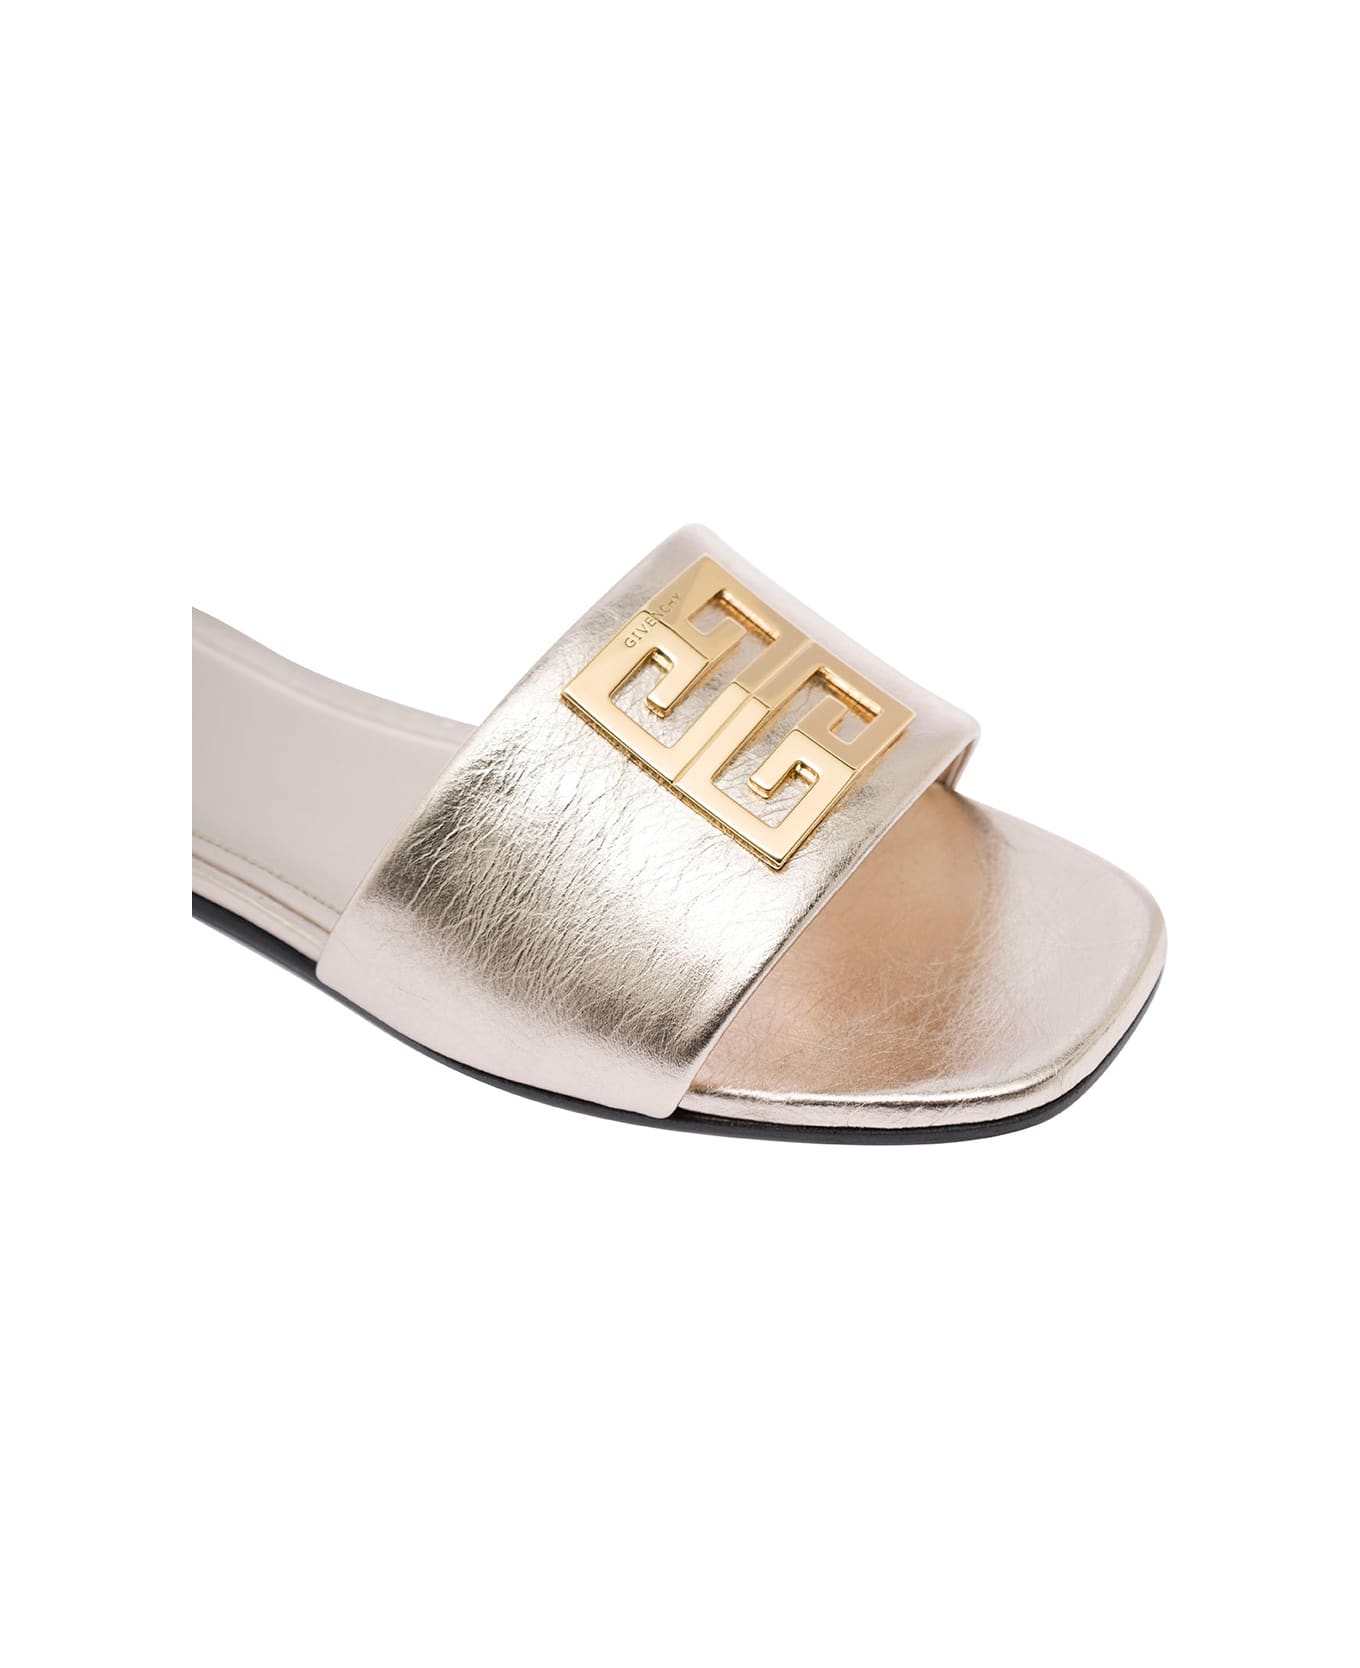 Givenchy Silver Flat Sandals With 4g Detail In Metallic Leather Woman - DUSTY GOLD サンダル